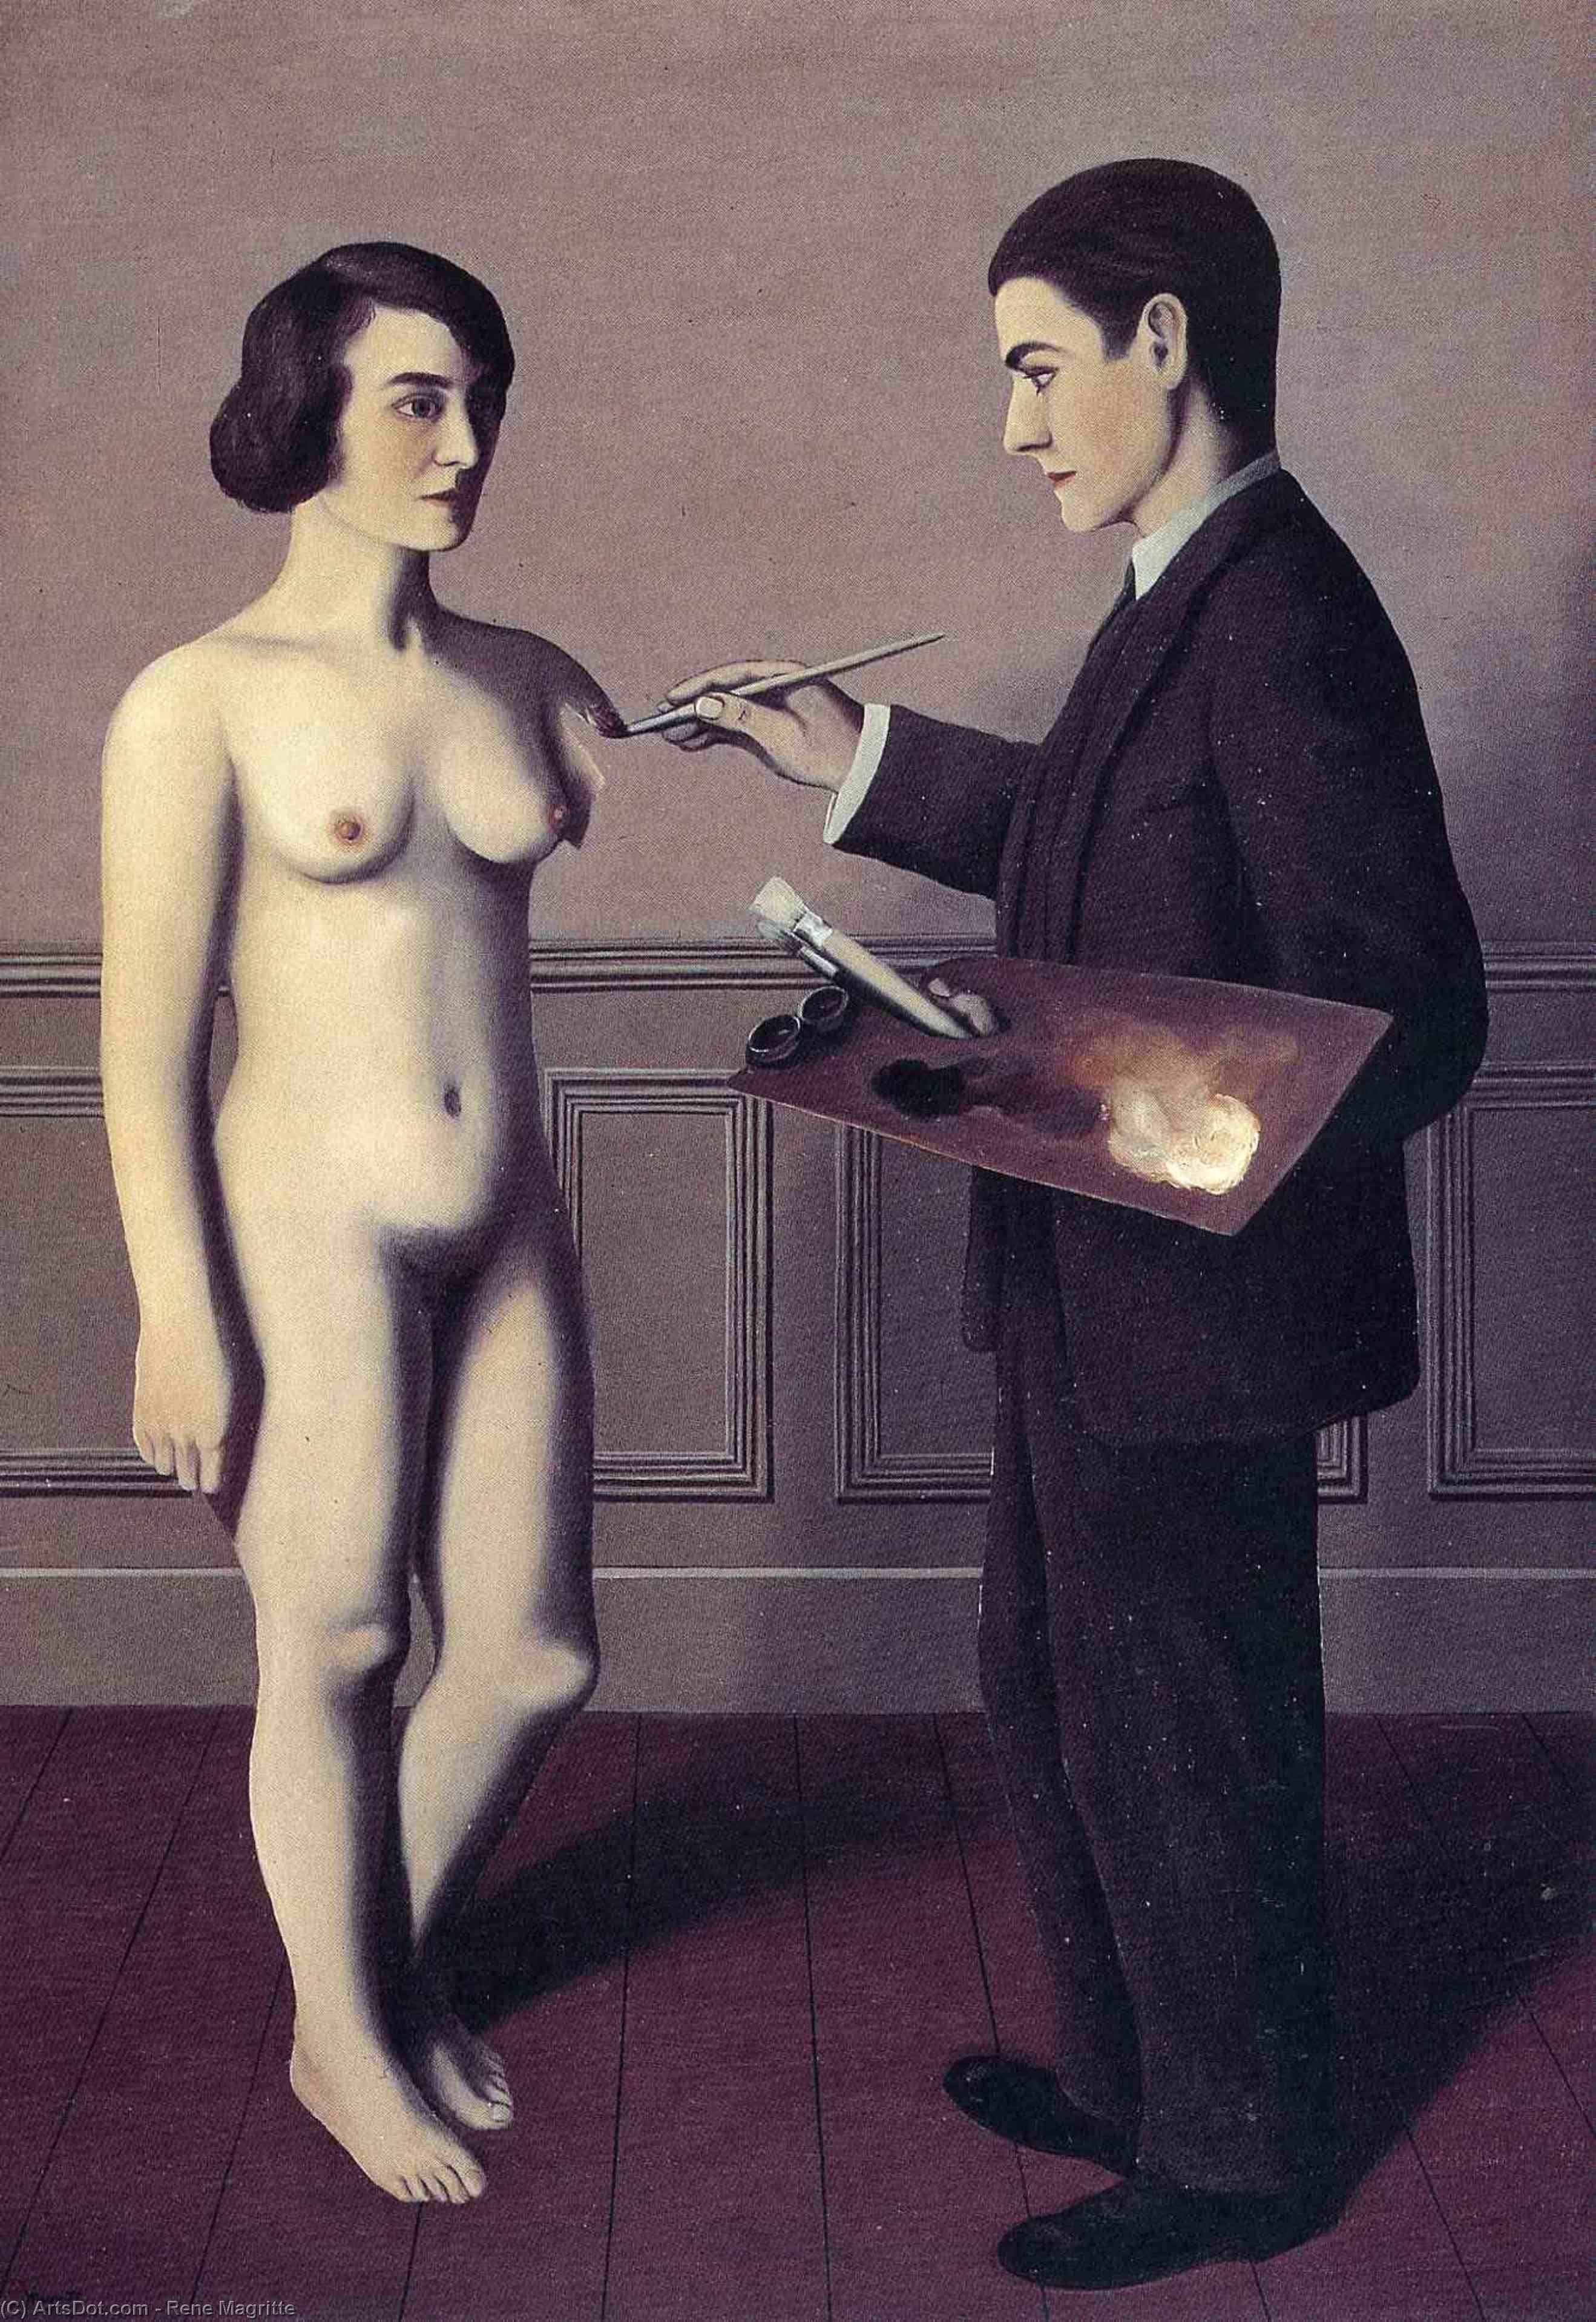 Order Oil Painting Replica Attempting the Impossible, 1928 by Rene Magritte (Inspired By) (1898-1967, Belgium) | ArtsDot.com